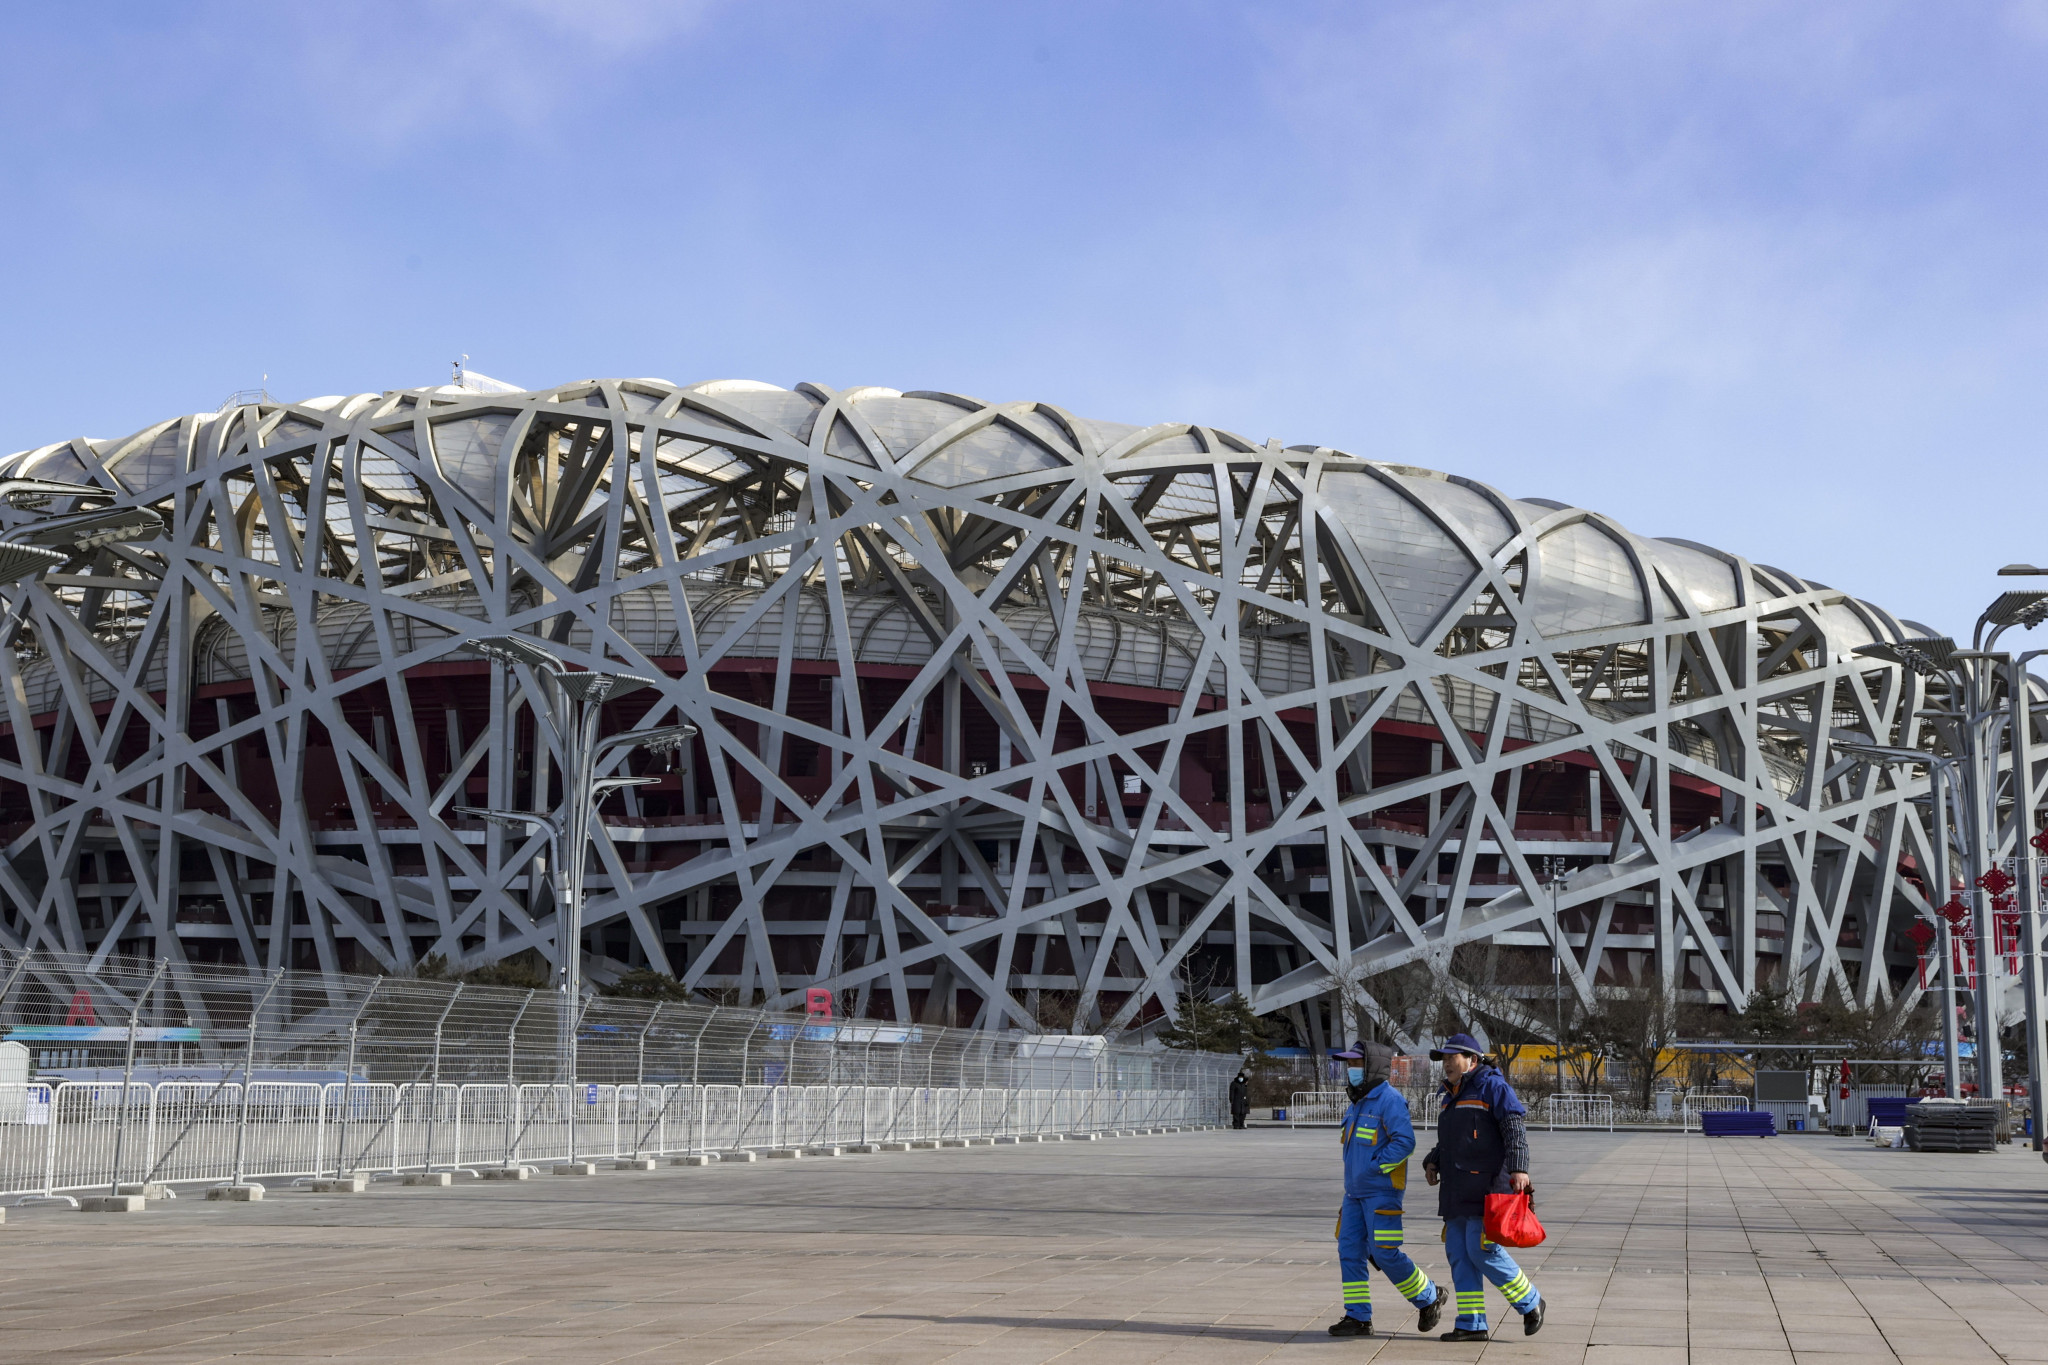 The National Stadium, also known as the Bird's Nest, will host the Opening and Closing Ceremony at both the Winter Olympic and Paralympic Games ©Getty Images